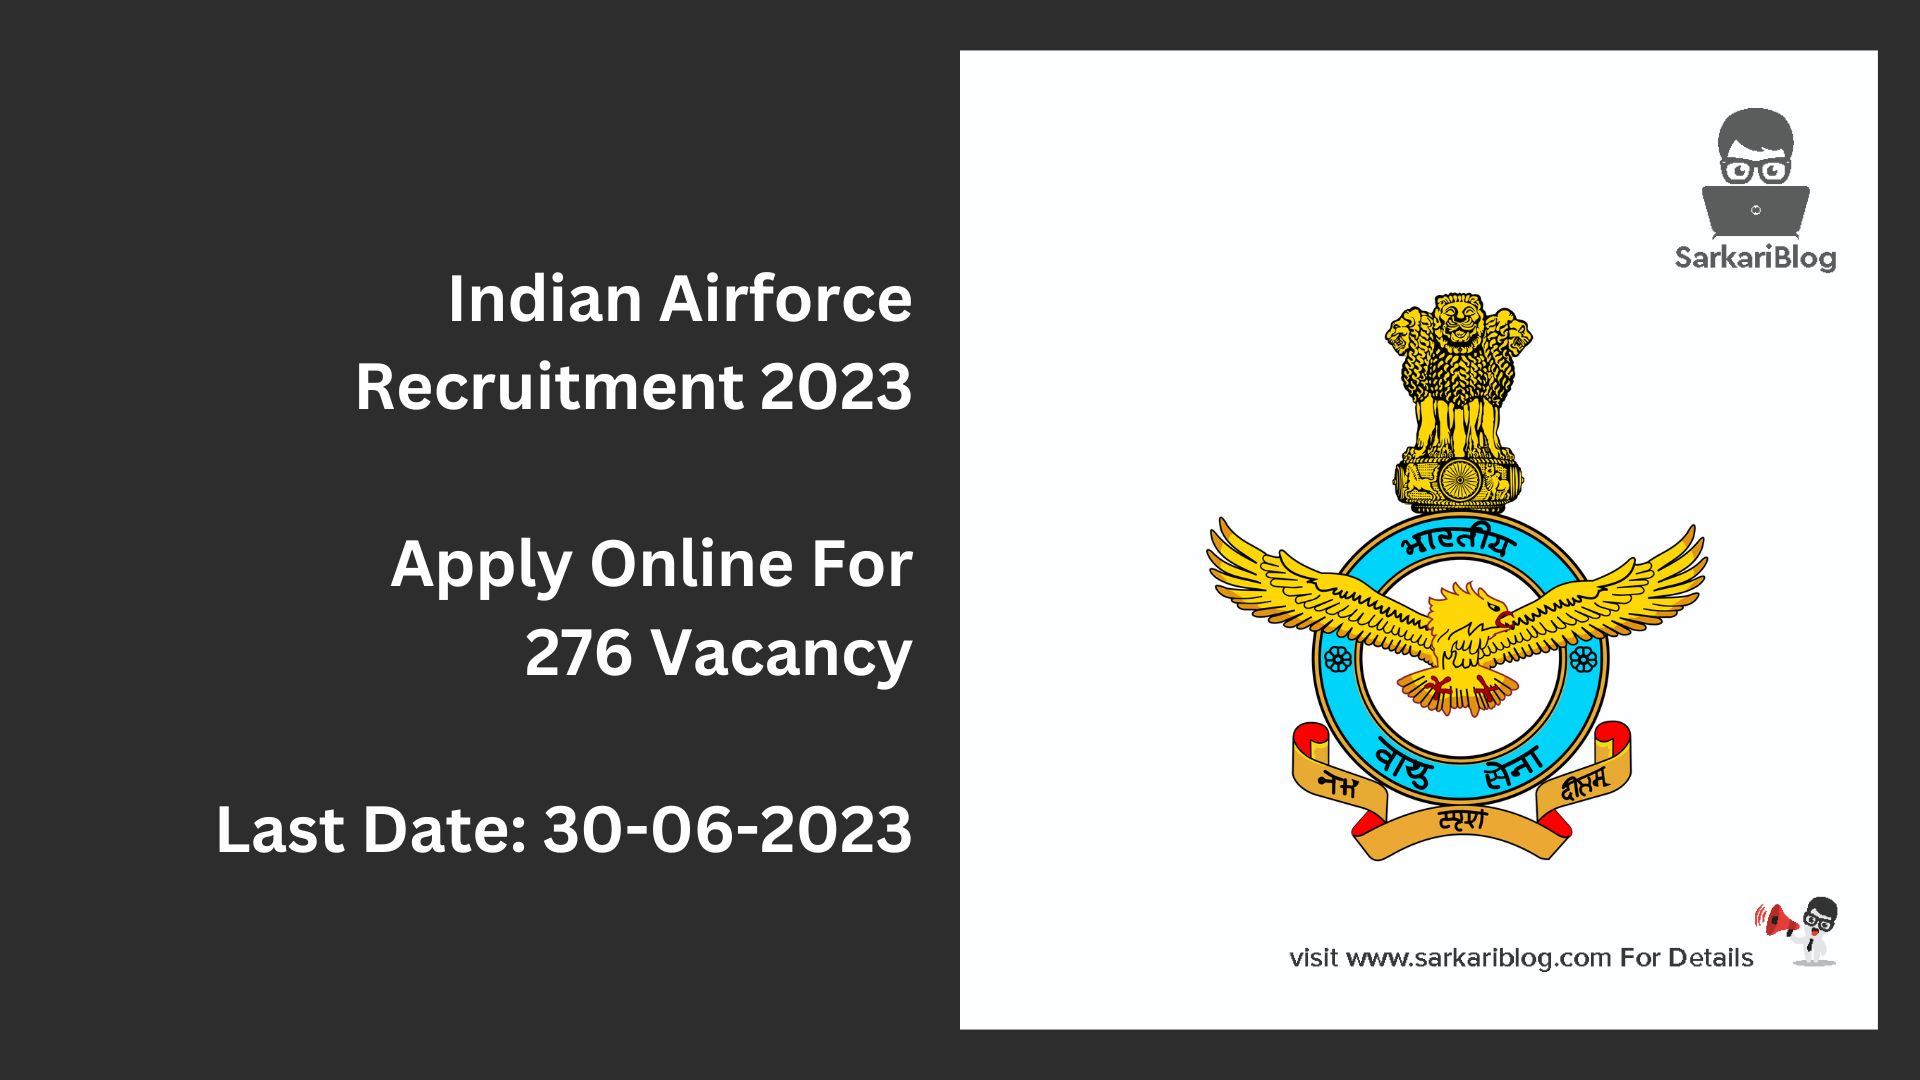 Indian Airforce Recruitment 2023